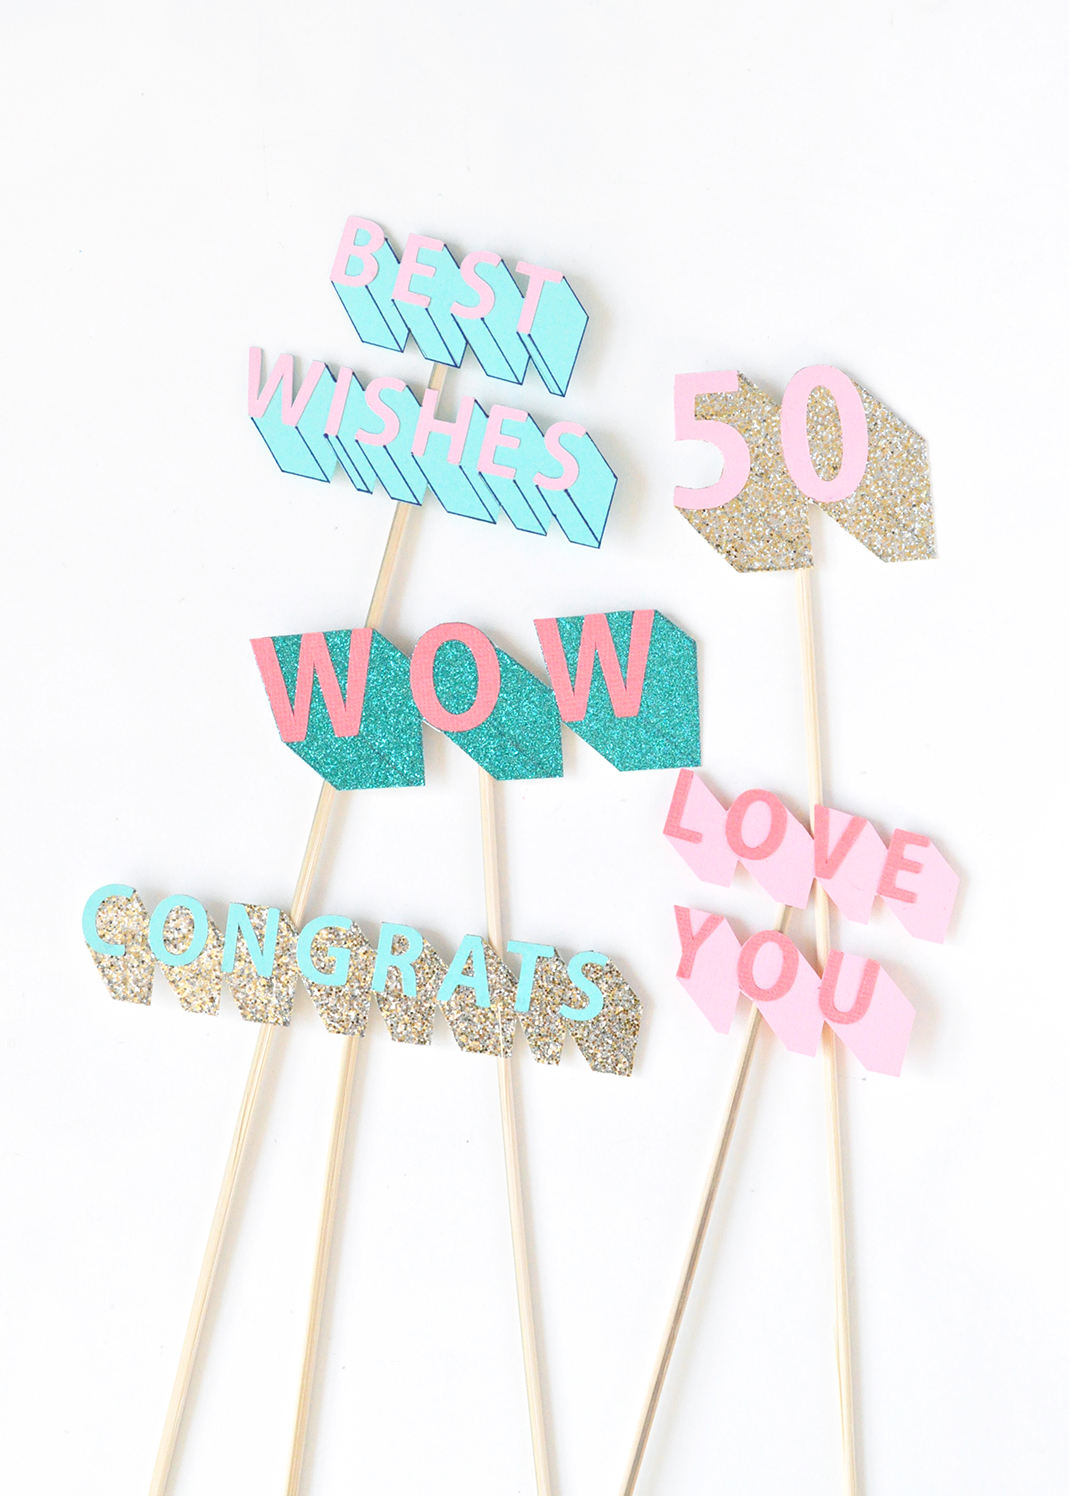 3D Cake Toppers